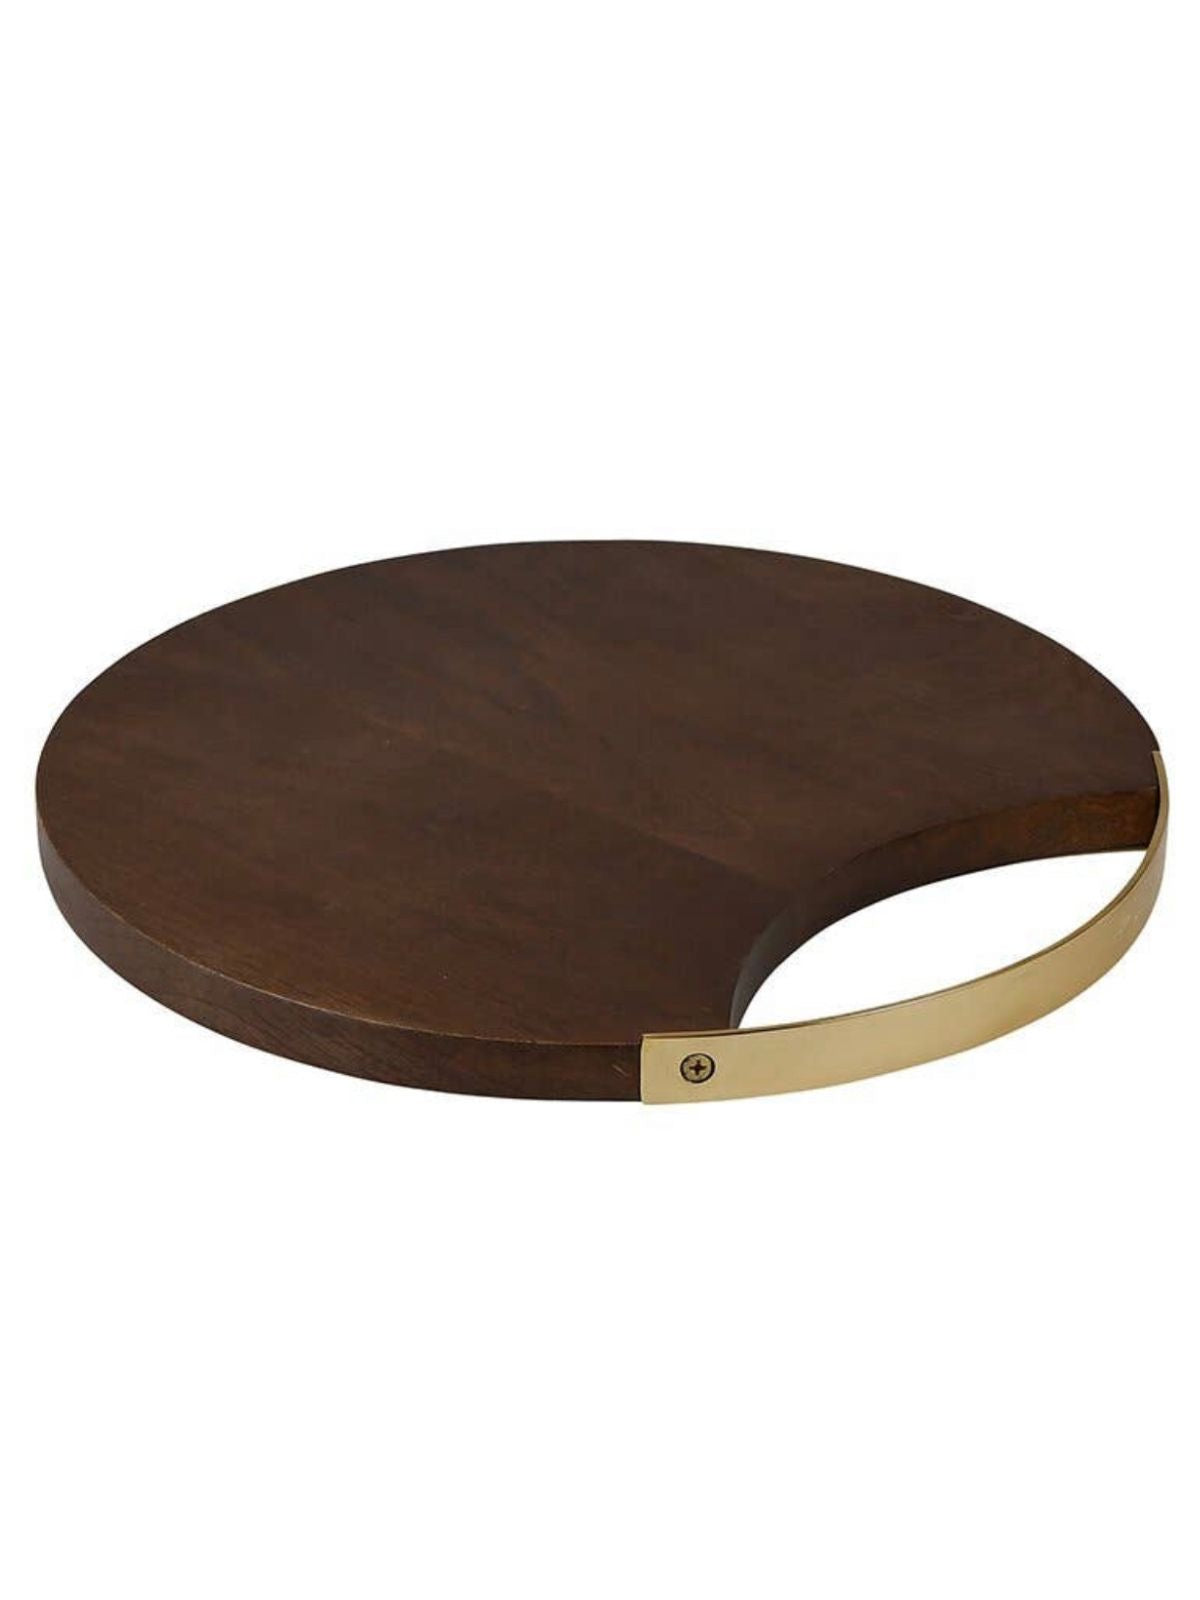 Serve cheeses and appetizers on this Wood and Brass 12in D Round board sold by KYA Home Decor.